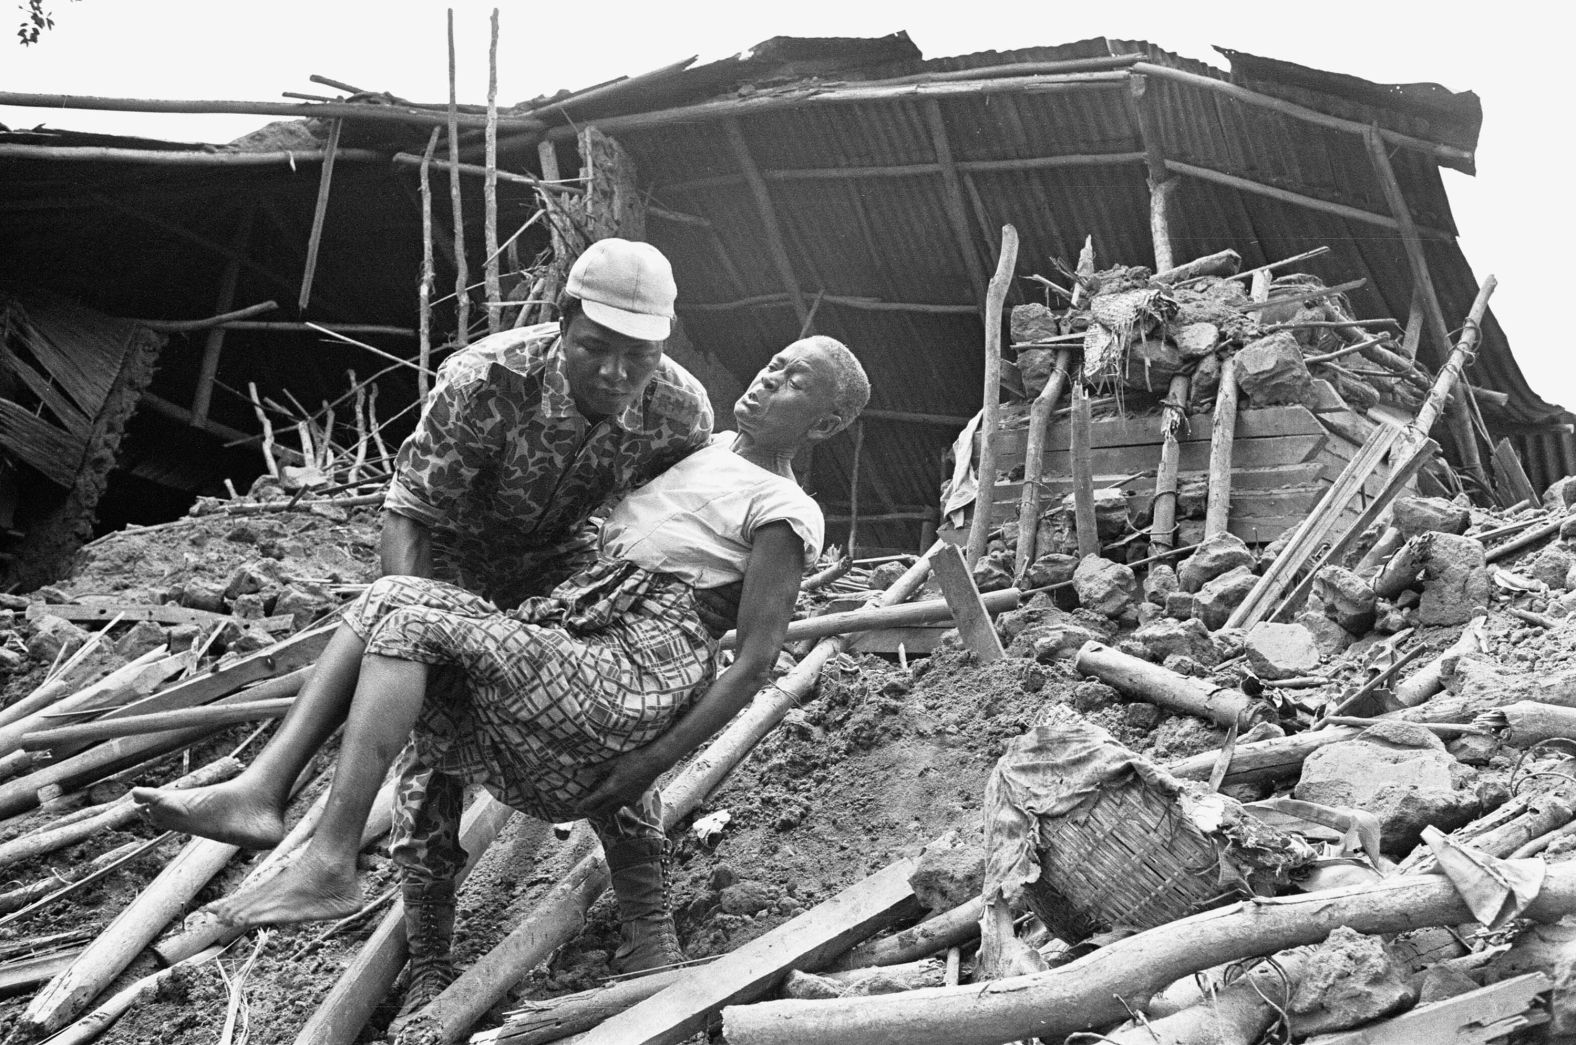 A Biafran soldier carries an elderly woman from the wreckage of her home following an artillery bombardment by the Nigerian army in June 1968.